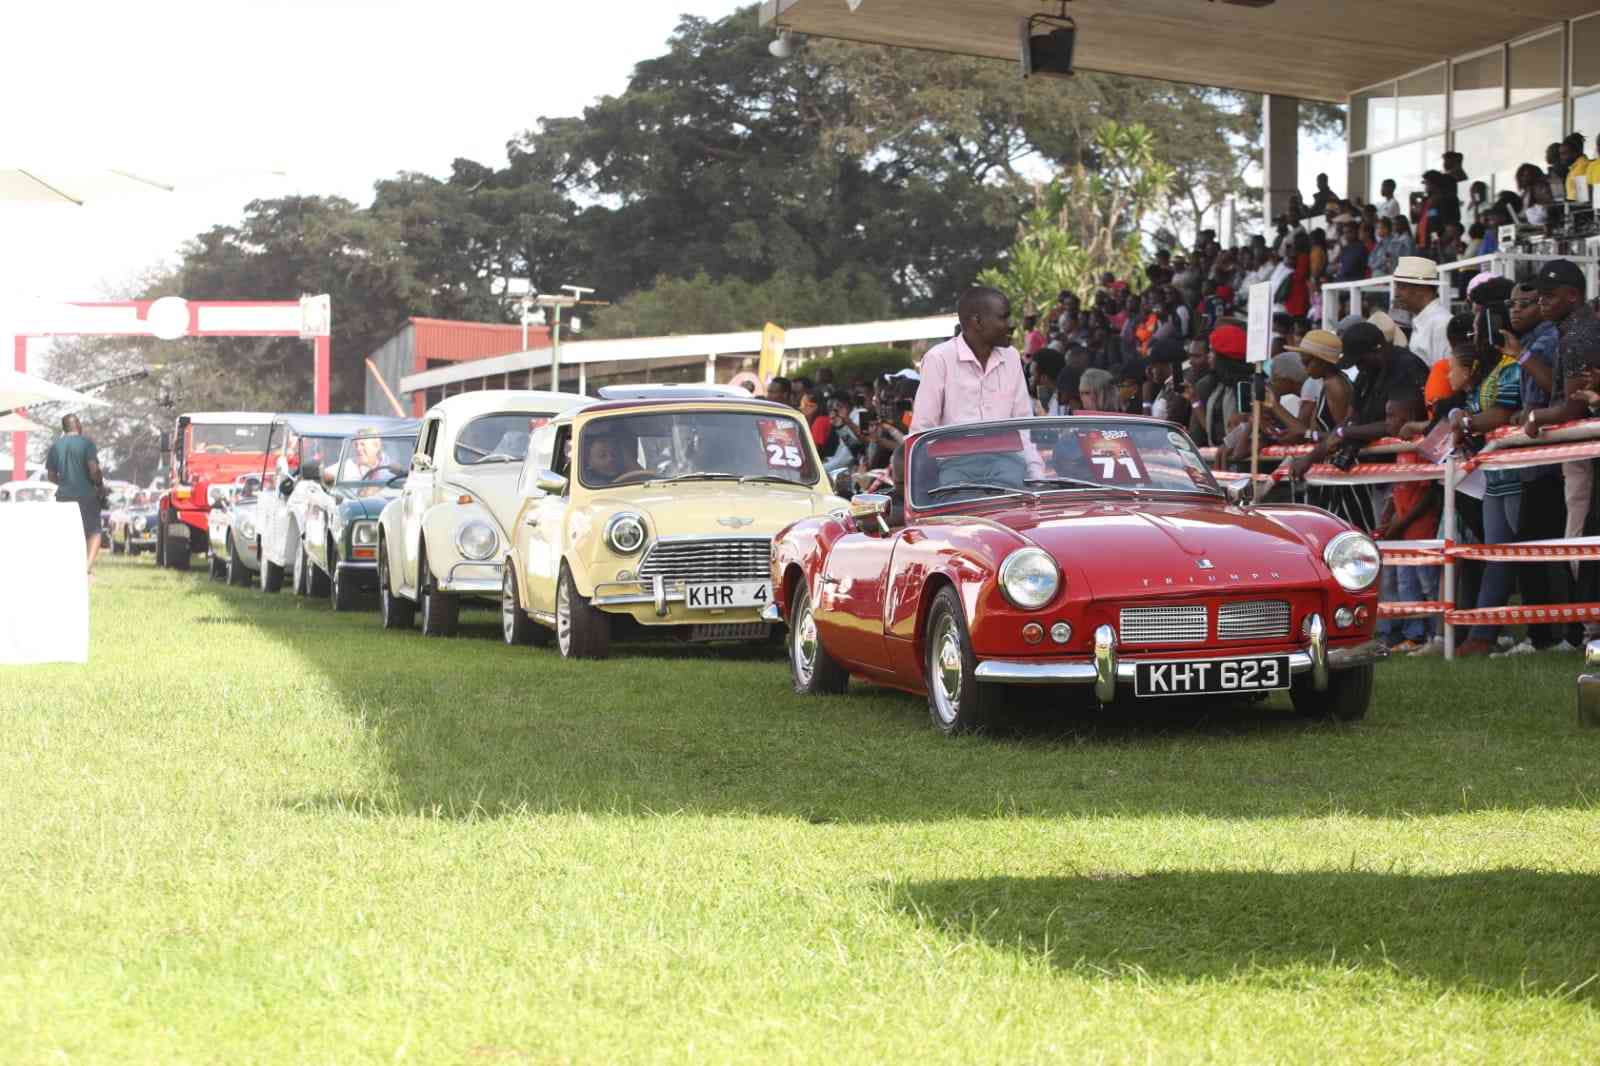 PHOTOS: How the 51st Edition of Concours d'Elegance went down